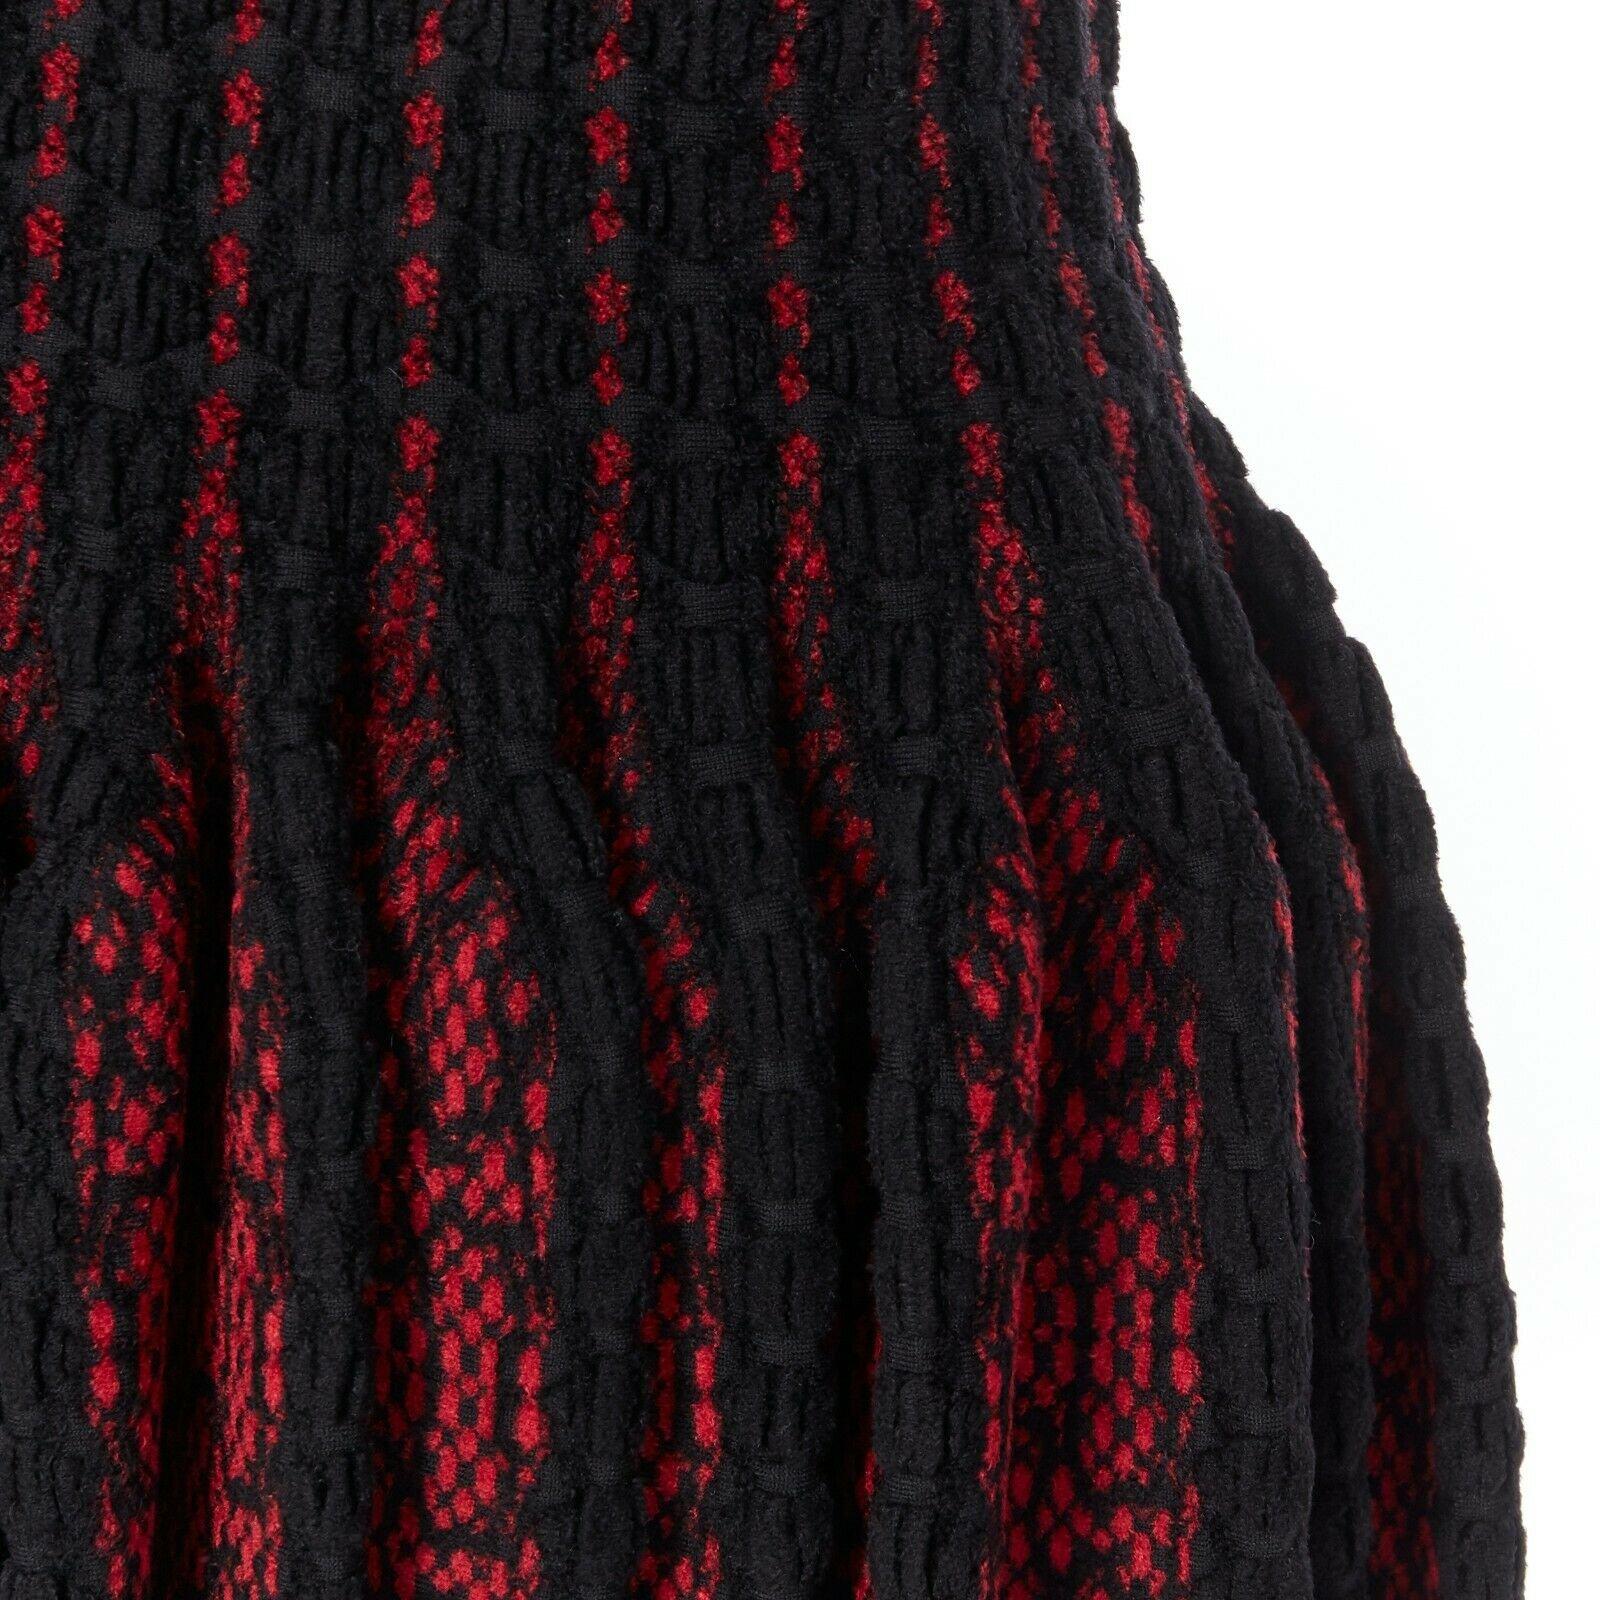 new ALAIA black red fleece wool geometric knit jacquard fit flare dress FR42 L 
Reference: TGAS/A03456 
Brand: Alaia 
Designer: Azzedine Alaia 
Material: Viscose 
Color: Black 
Pattern: Floral 
Closure: Zip 
Extra Detail: V-neck. Sleeveless.